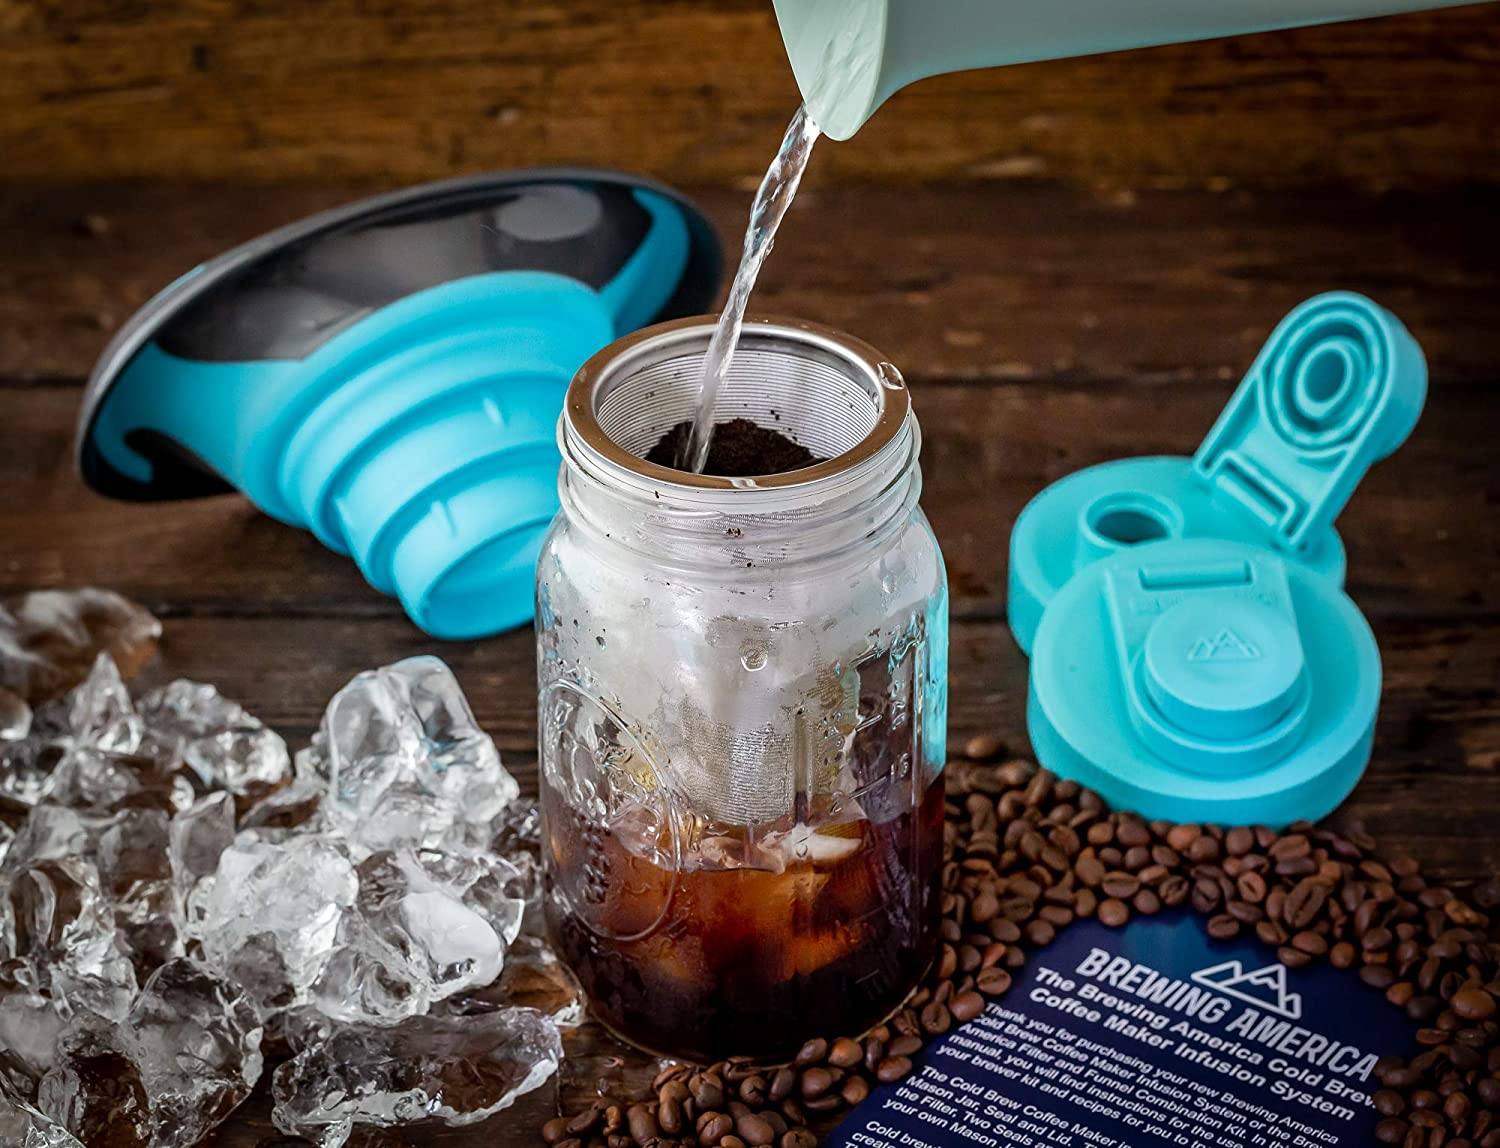 Cold Brew Coffee Maker Kit: Wide Mouth Mason Jar, Filter and Funnel for Clean Brewing and Infused Tea - 2 Quart Teal Lid Brewing America 